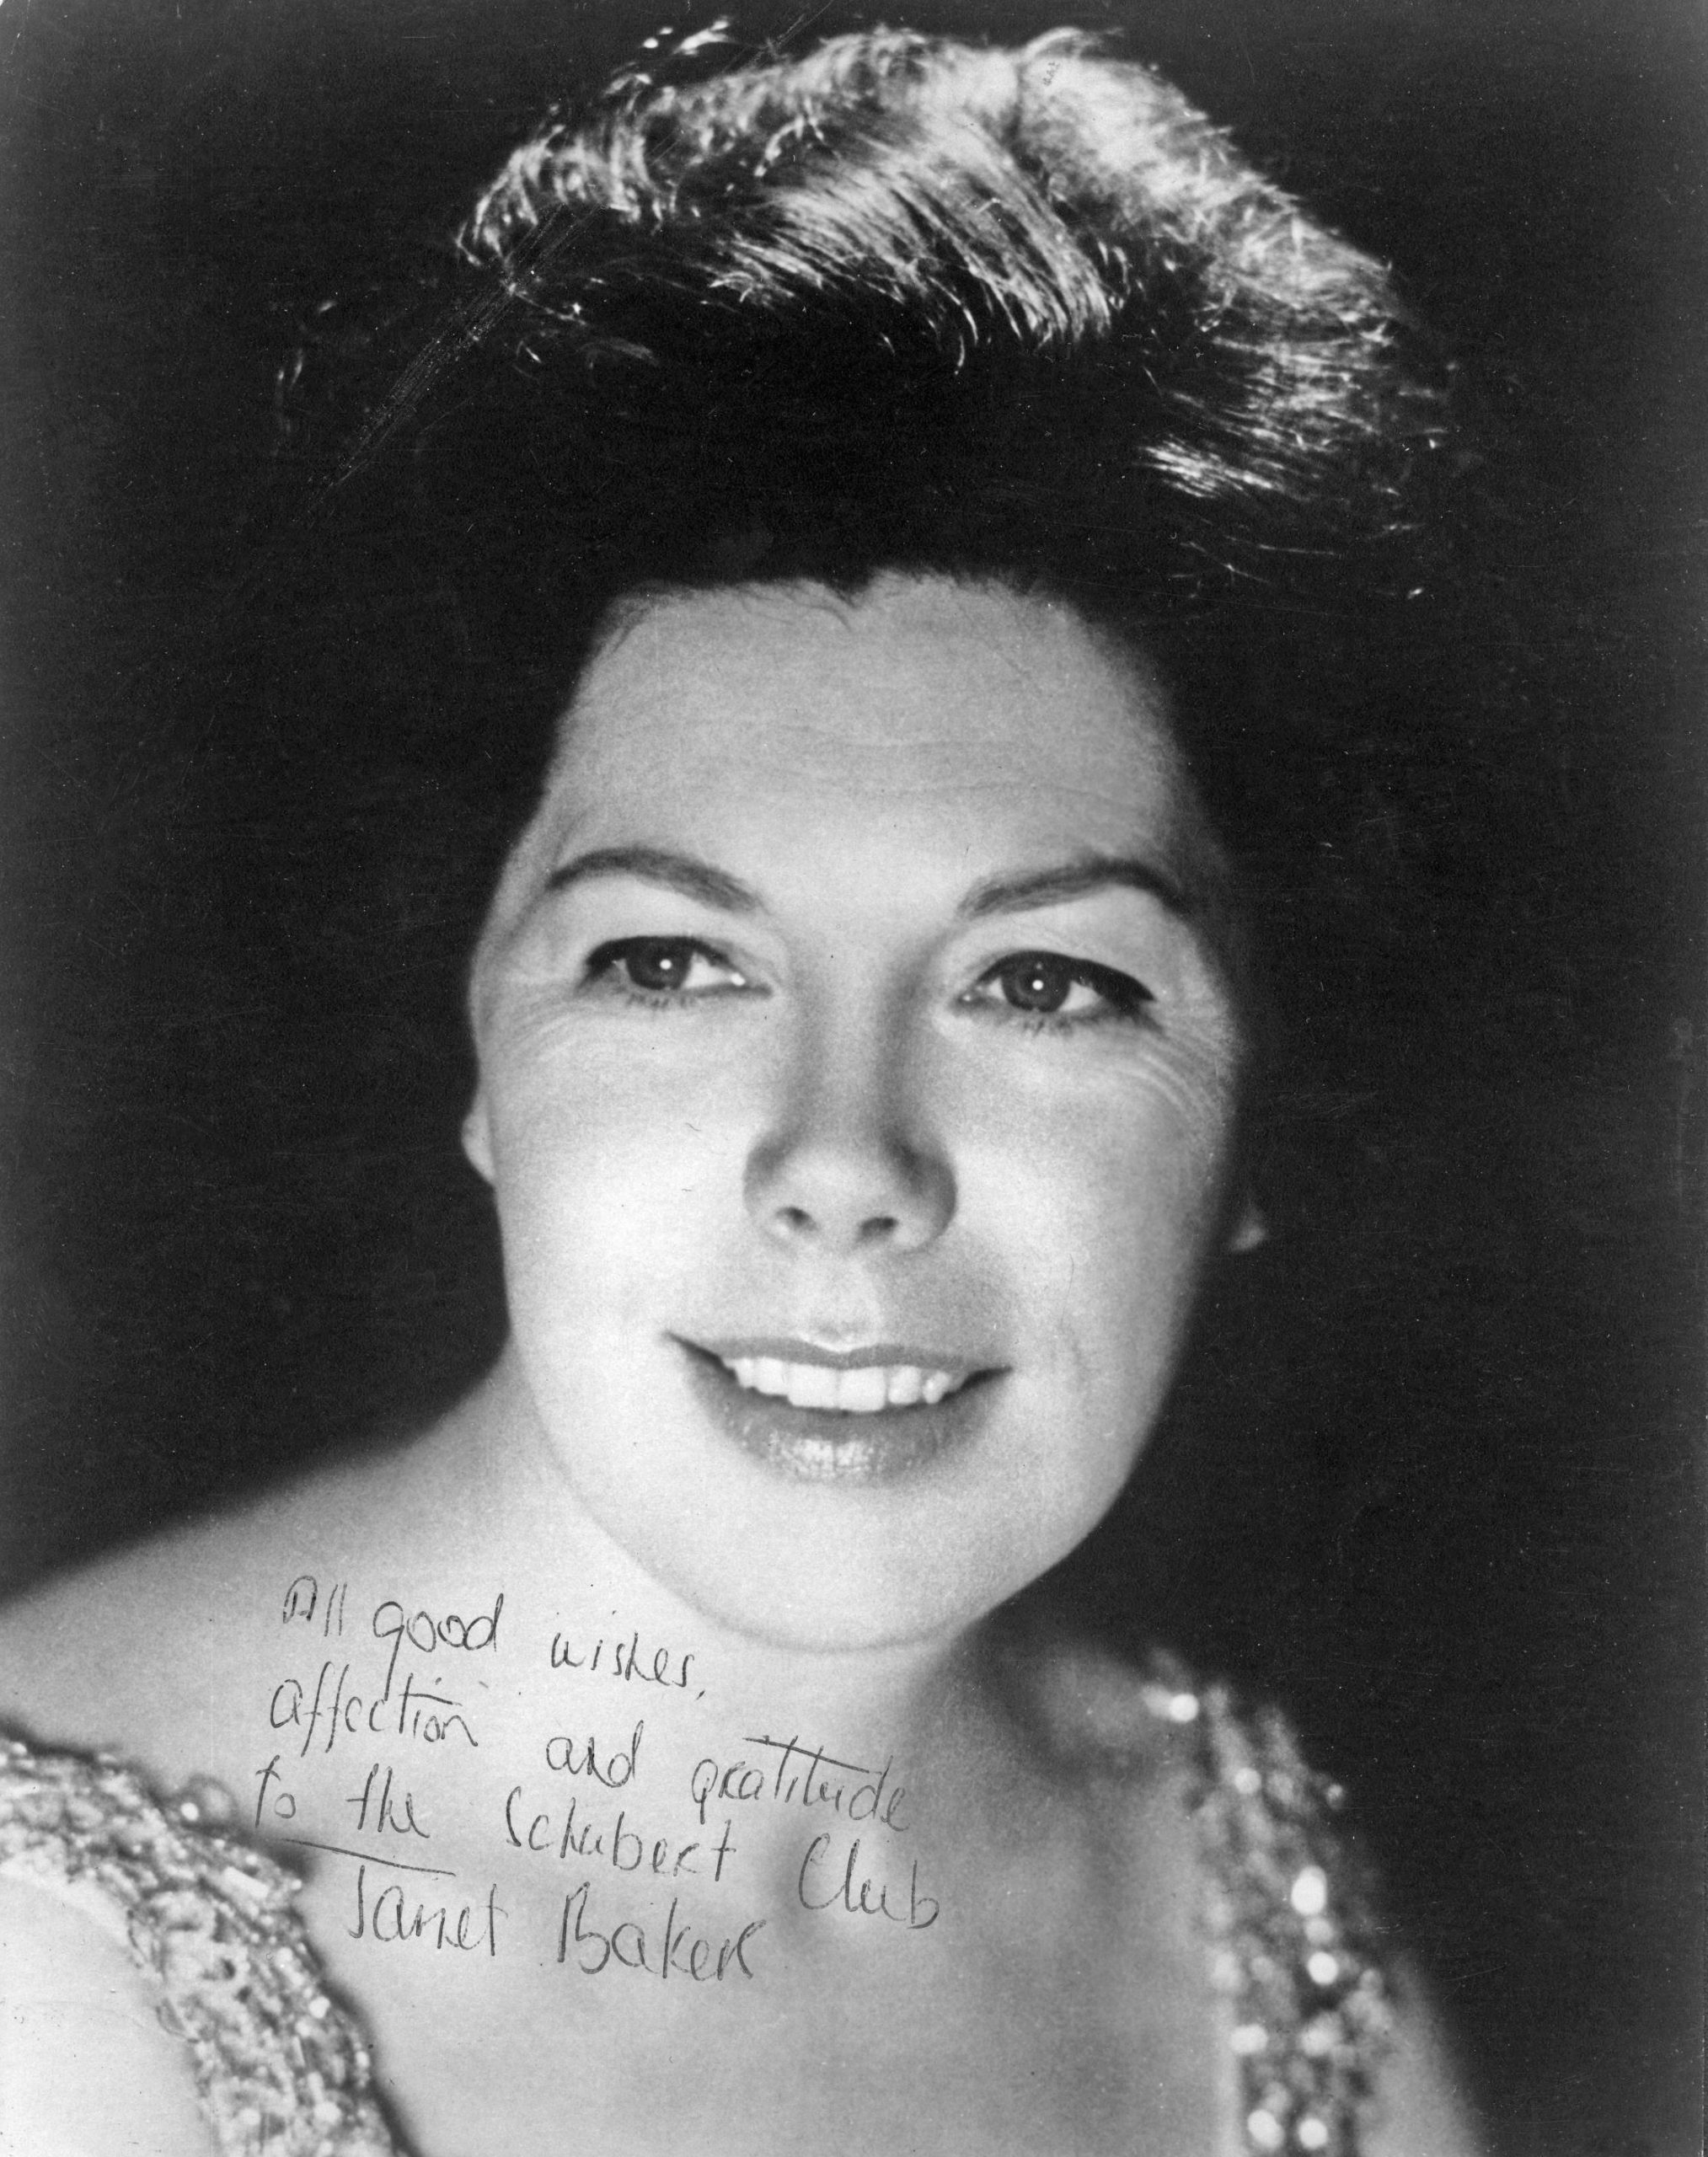 signed black and white photograph of Janet Baker smiling and looking slightly off-camera